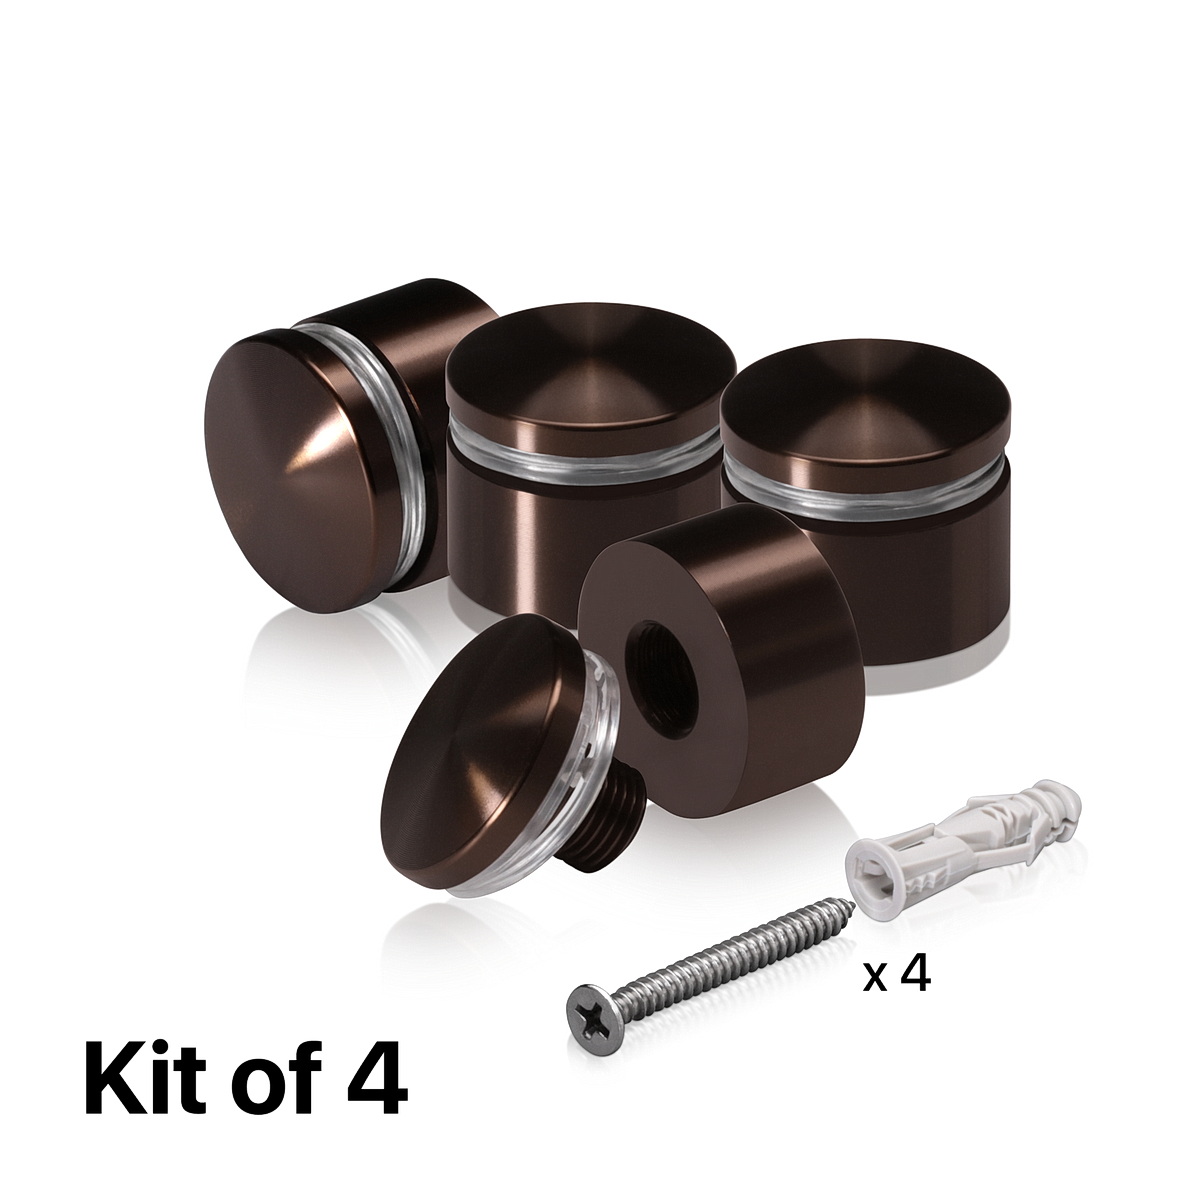 (Set of 4) 1'' Diameter X 1/2'' Barrel Length, Aluminum Rounded Head Standoffs, Bronze Anodized Finish Standoff with (4) 2216Z Screws and (4) LANC1 Anchors for concrete or drywall (For Inside / Outside use) [Required Material Hole Size: 7/16'']